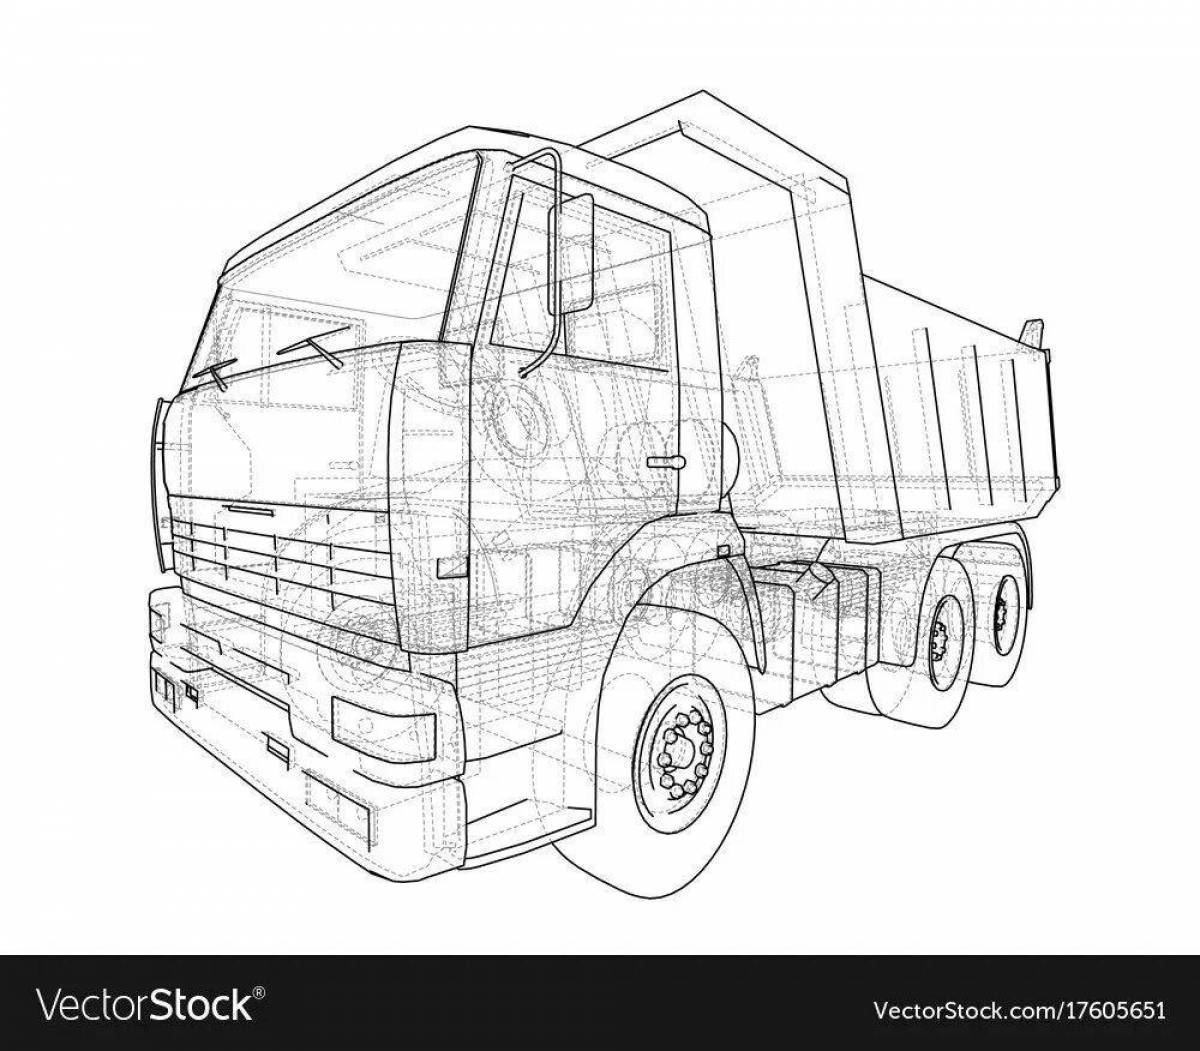 Coloring page charming kamaz dump truck